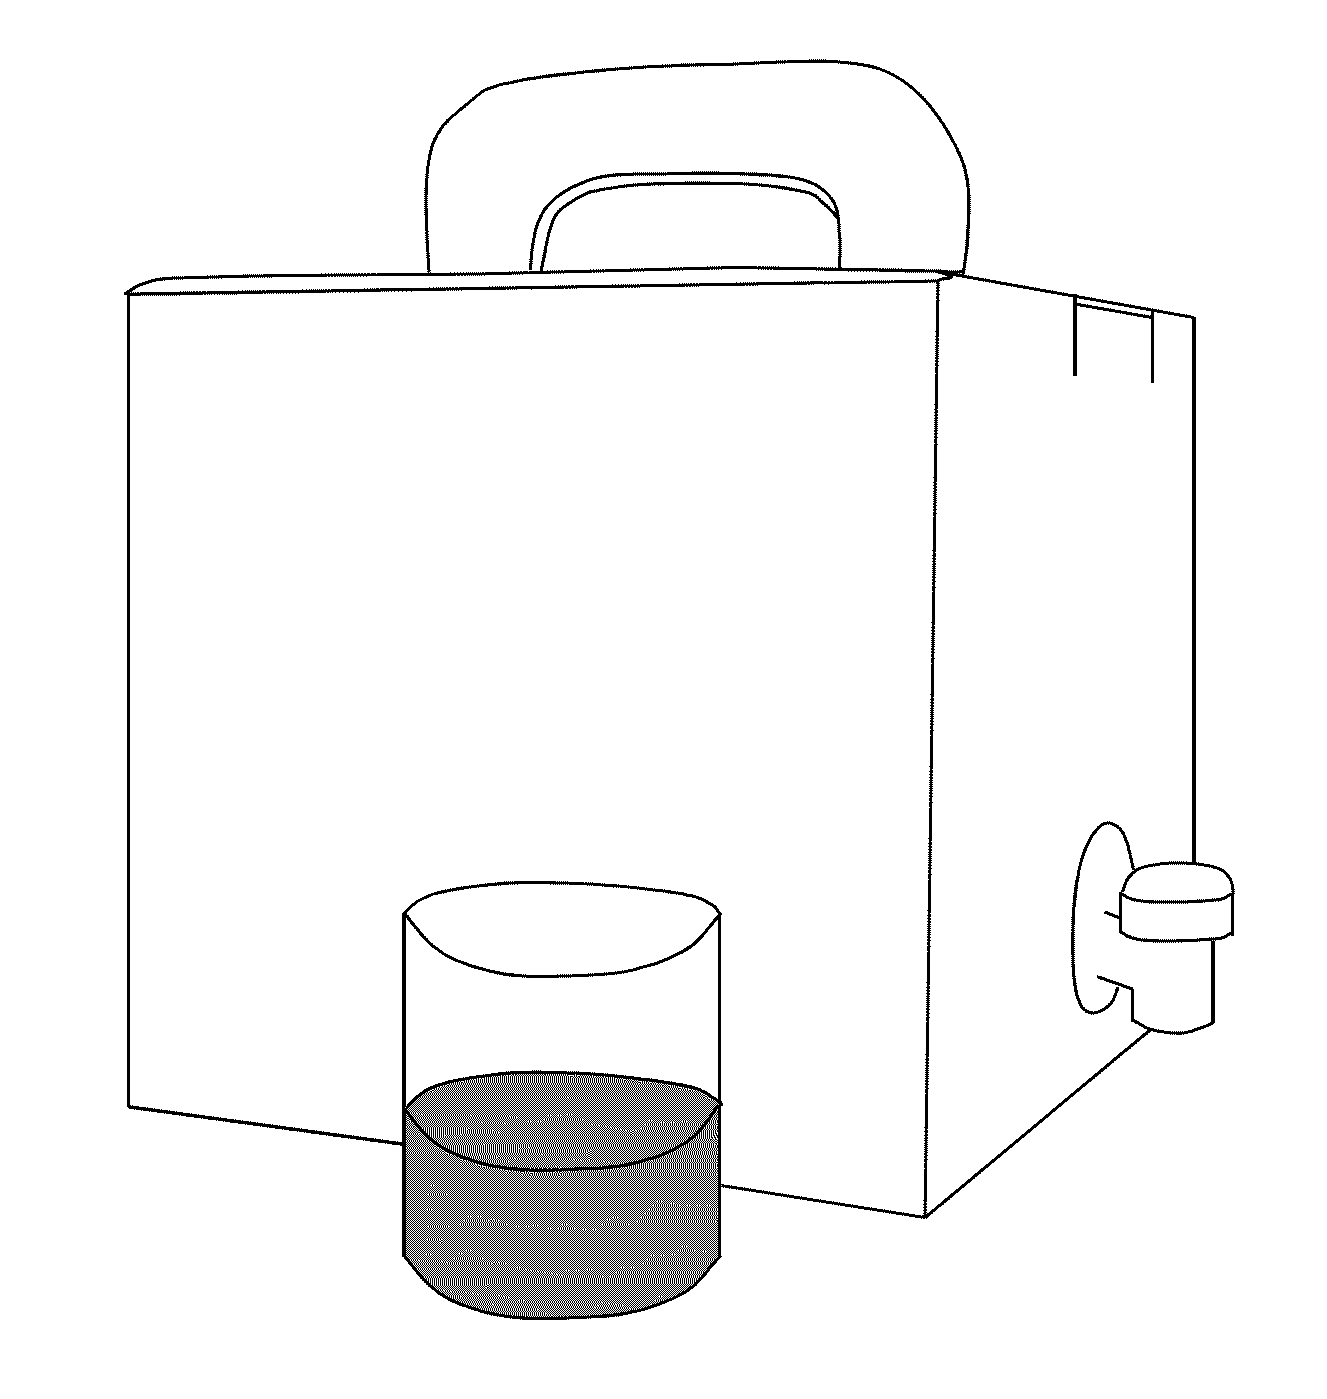 Laundry Detergent Container and Method for Making a Laundry Detergent Container